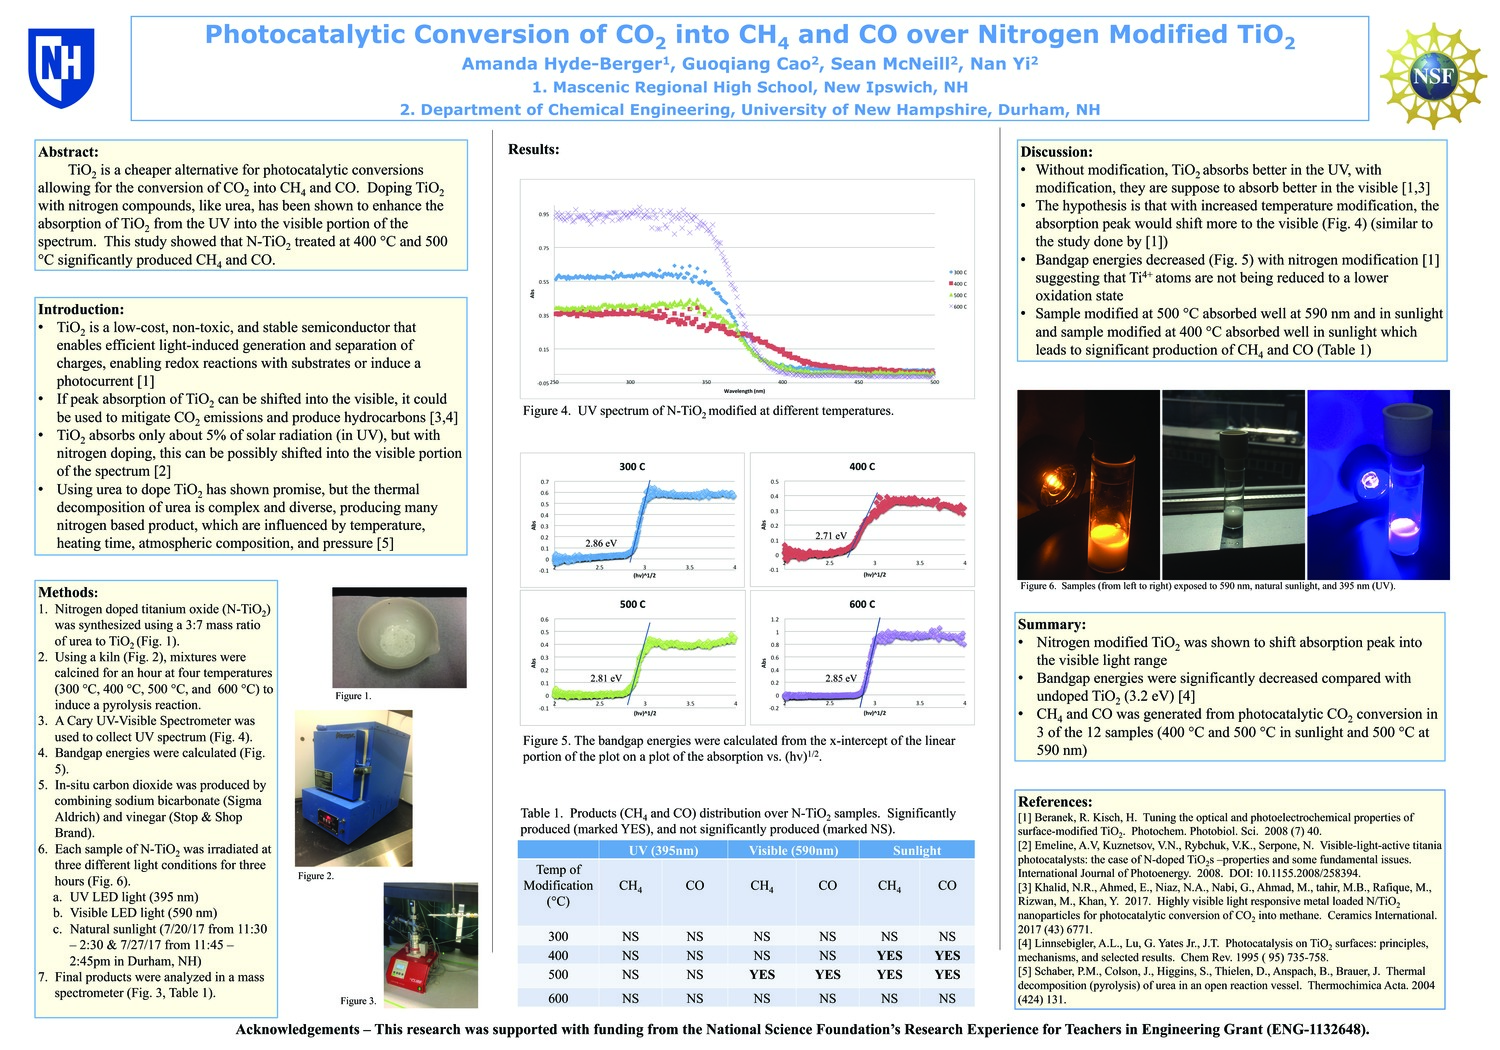 Photocatalytic Conversion Of Co2 Into Ch4 And Co Over Nitrogen Modified Tio2 by AmandaHydeBerger